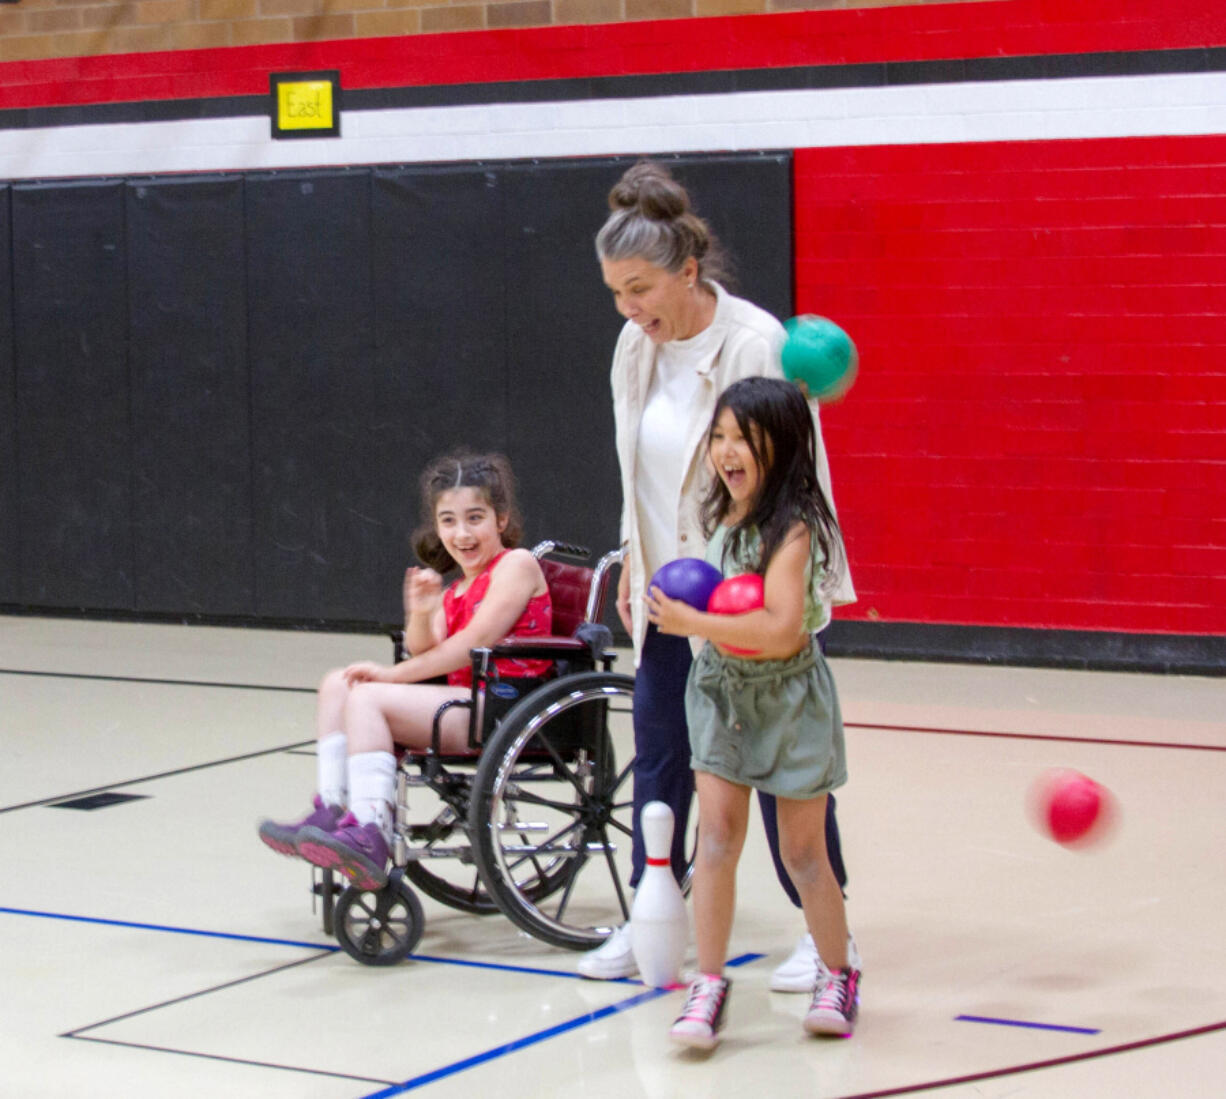 The teaching staff at Woodland Public Schools uses adaptive curriculum to ensure students with disabilities can participate in all aspects of the school day.